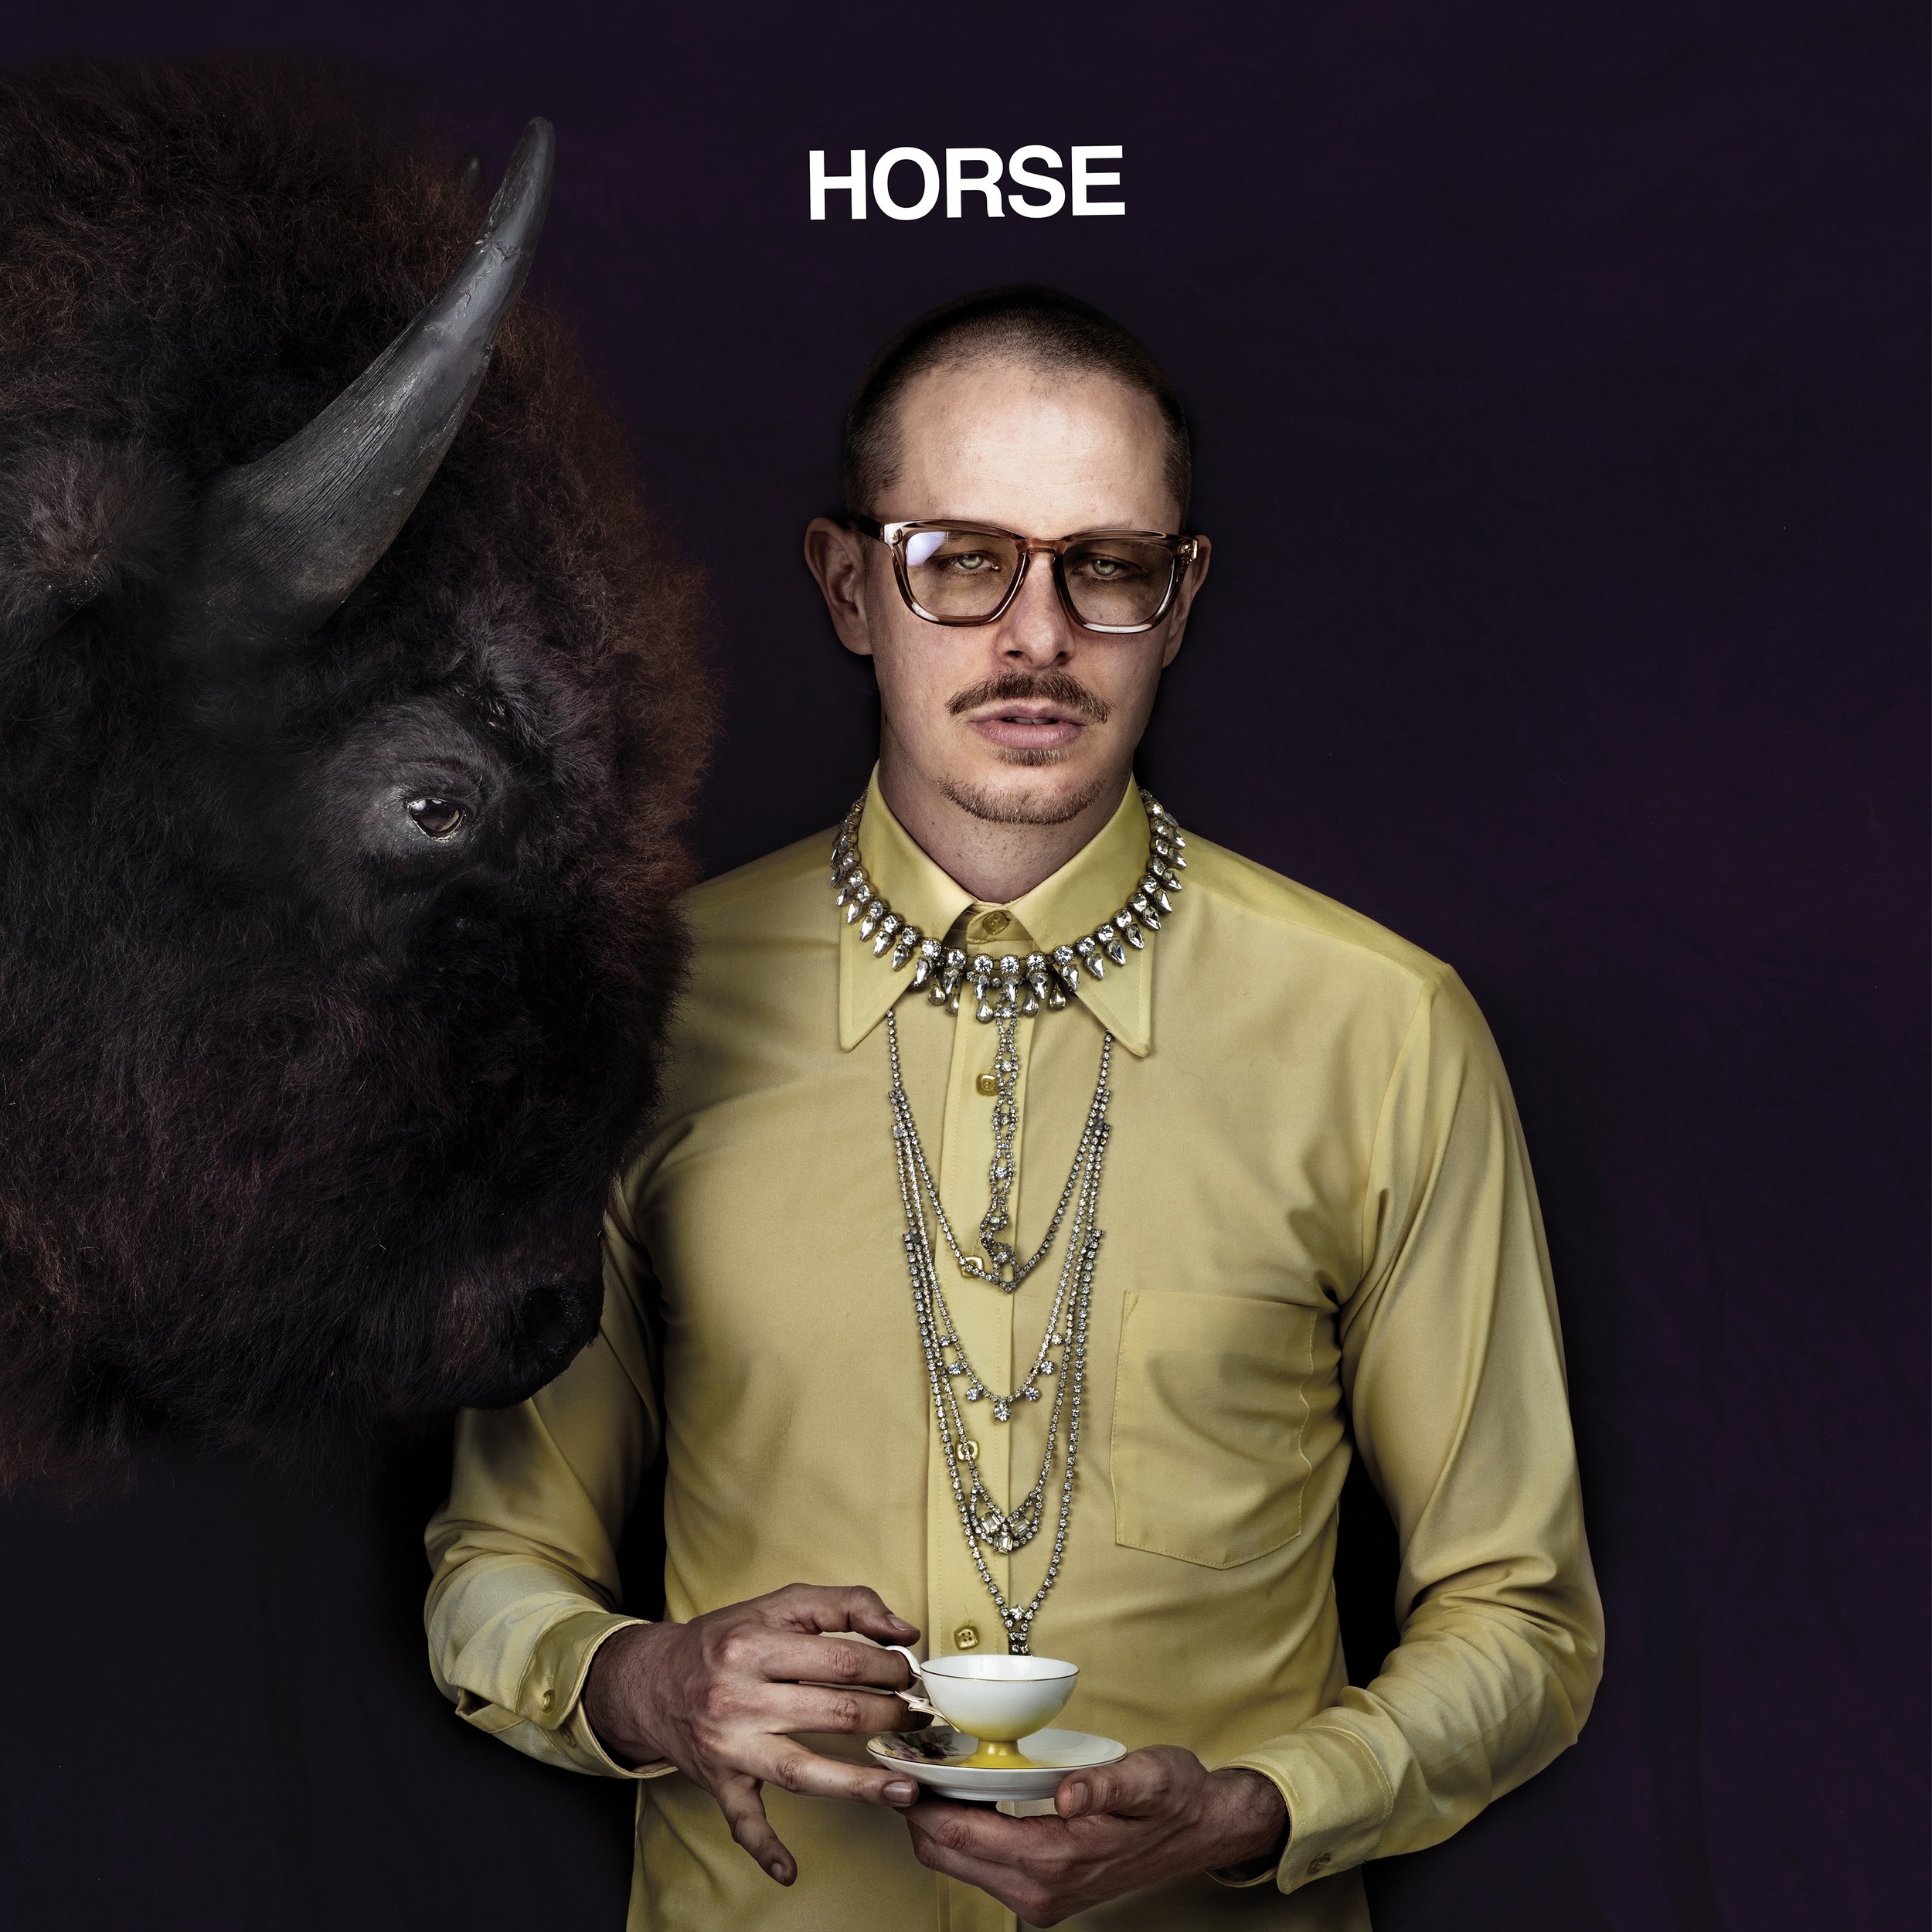 PROF’s New Album ‘HORSE’ is Available for Pre-Order